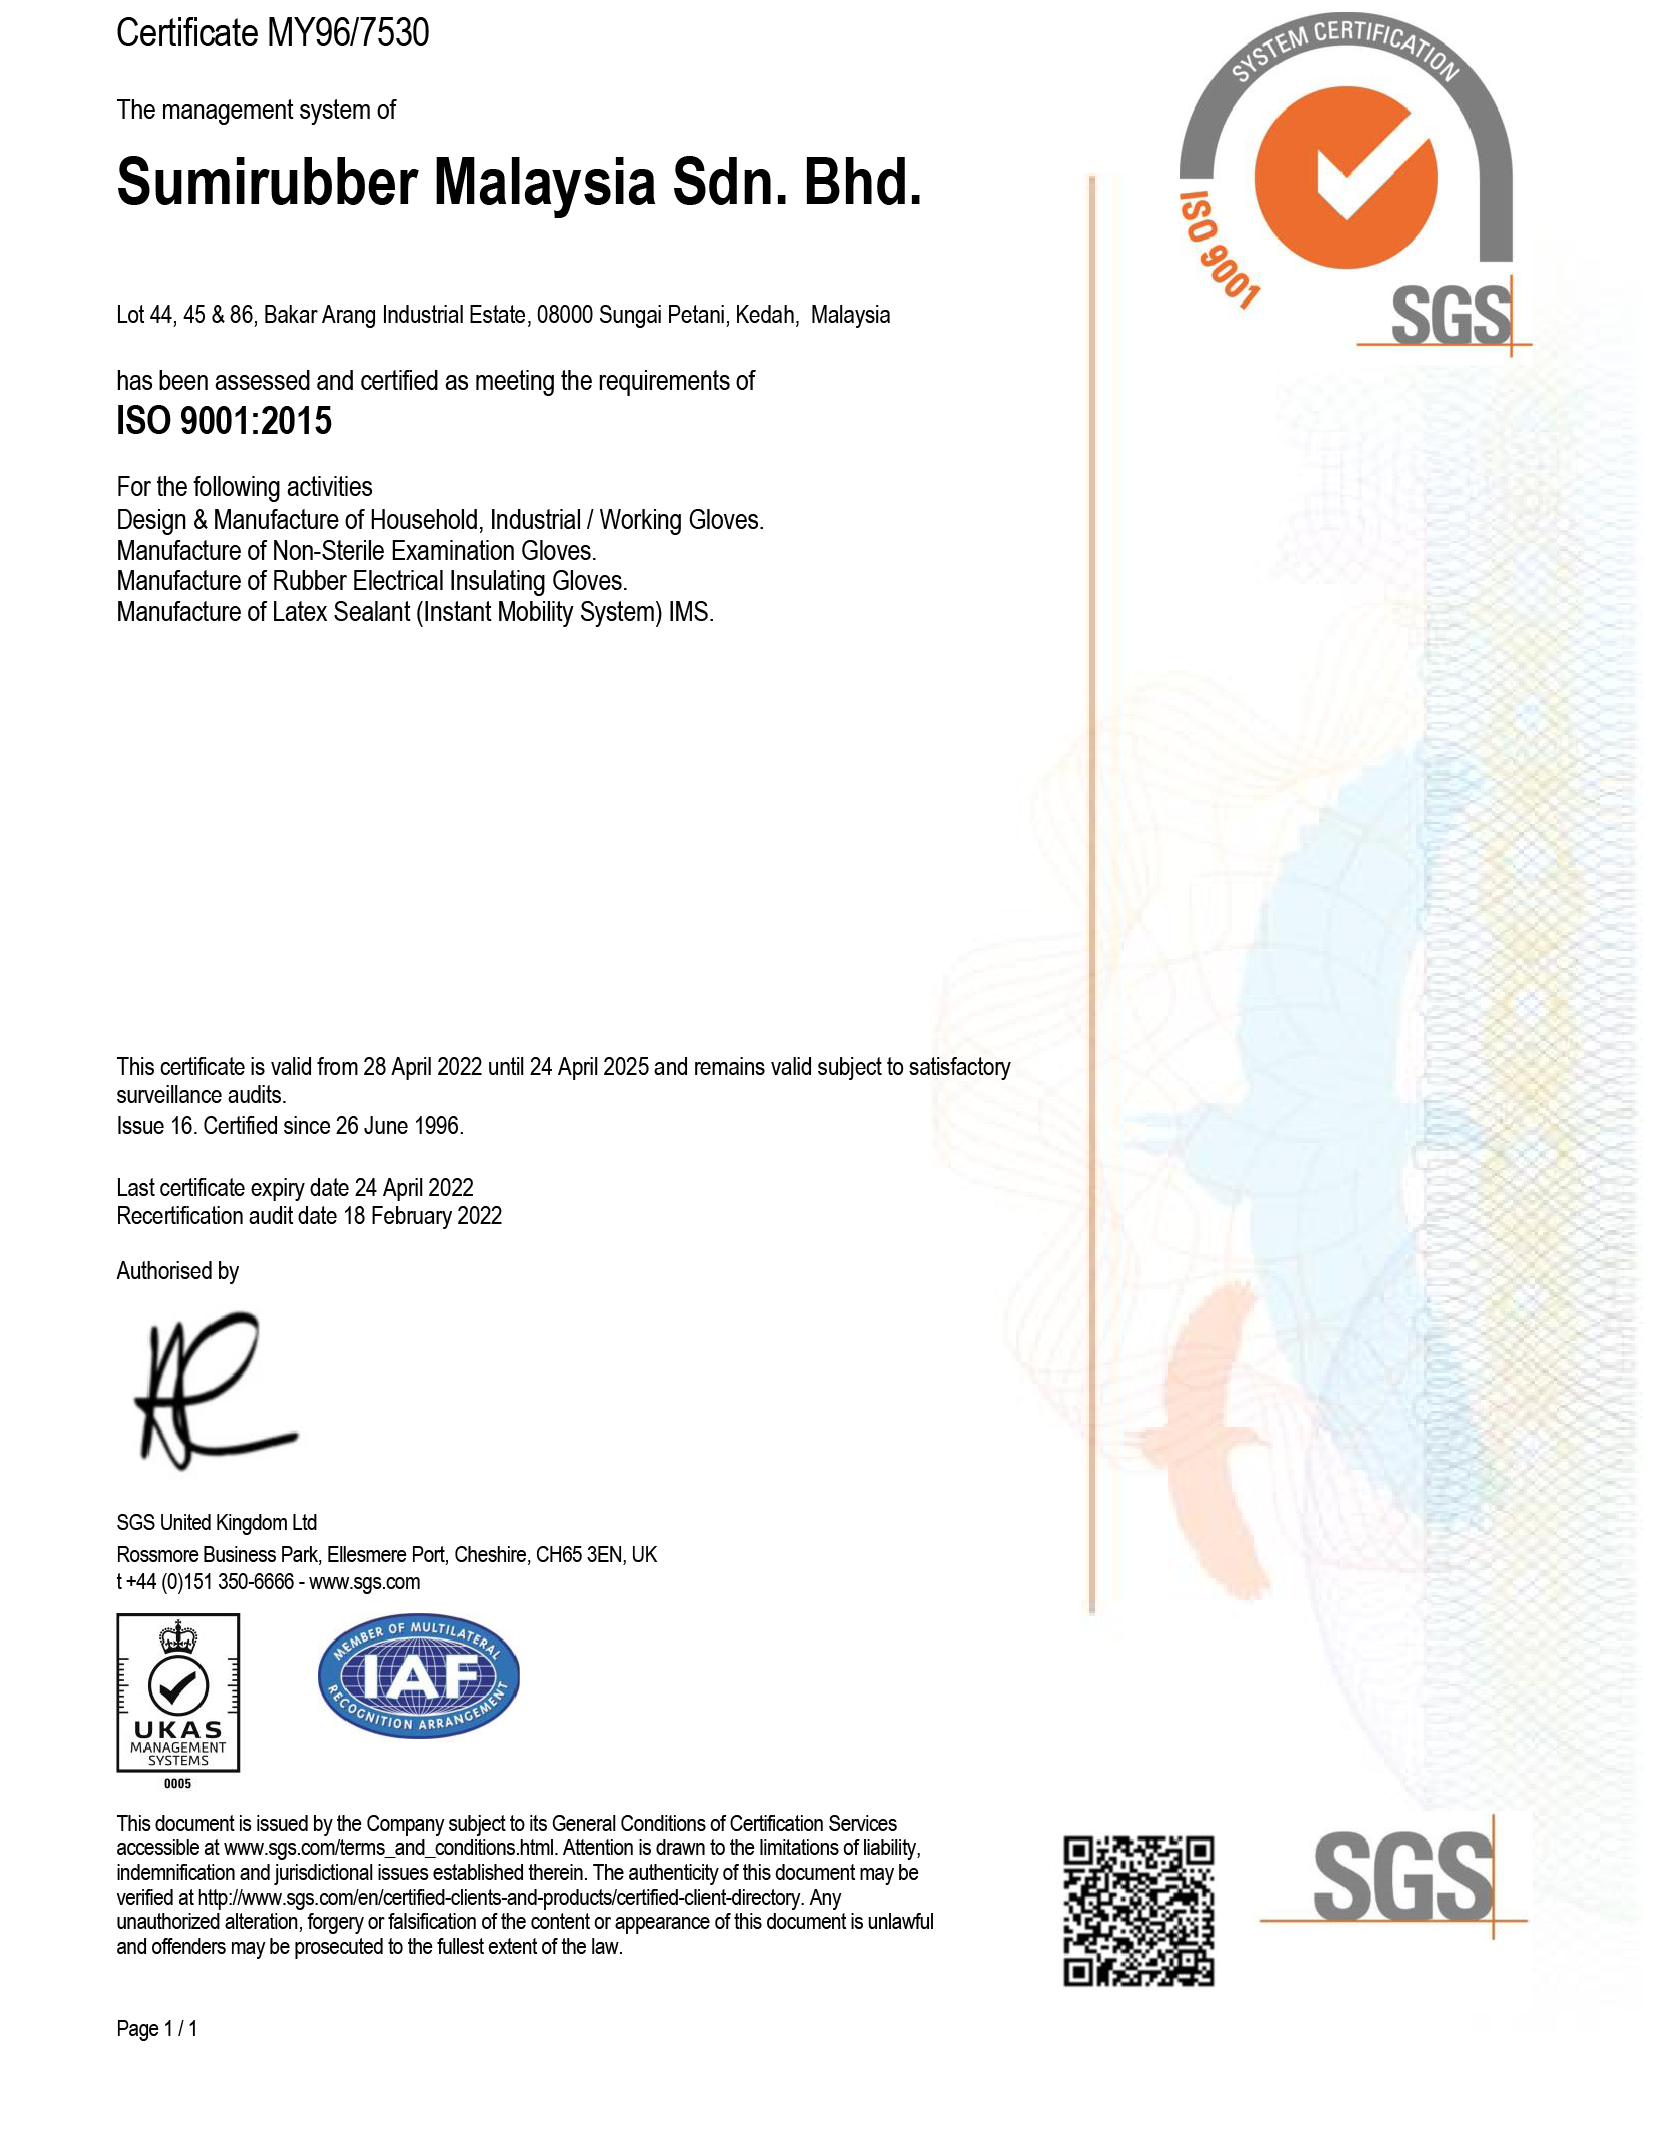 ISO 9001:2105